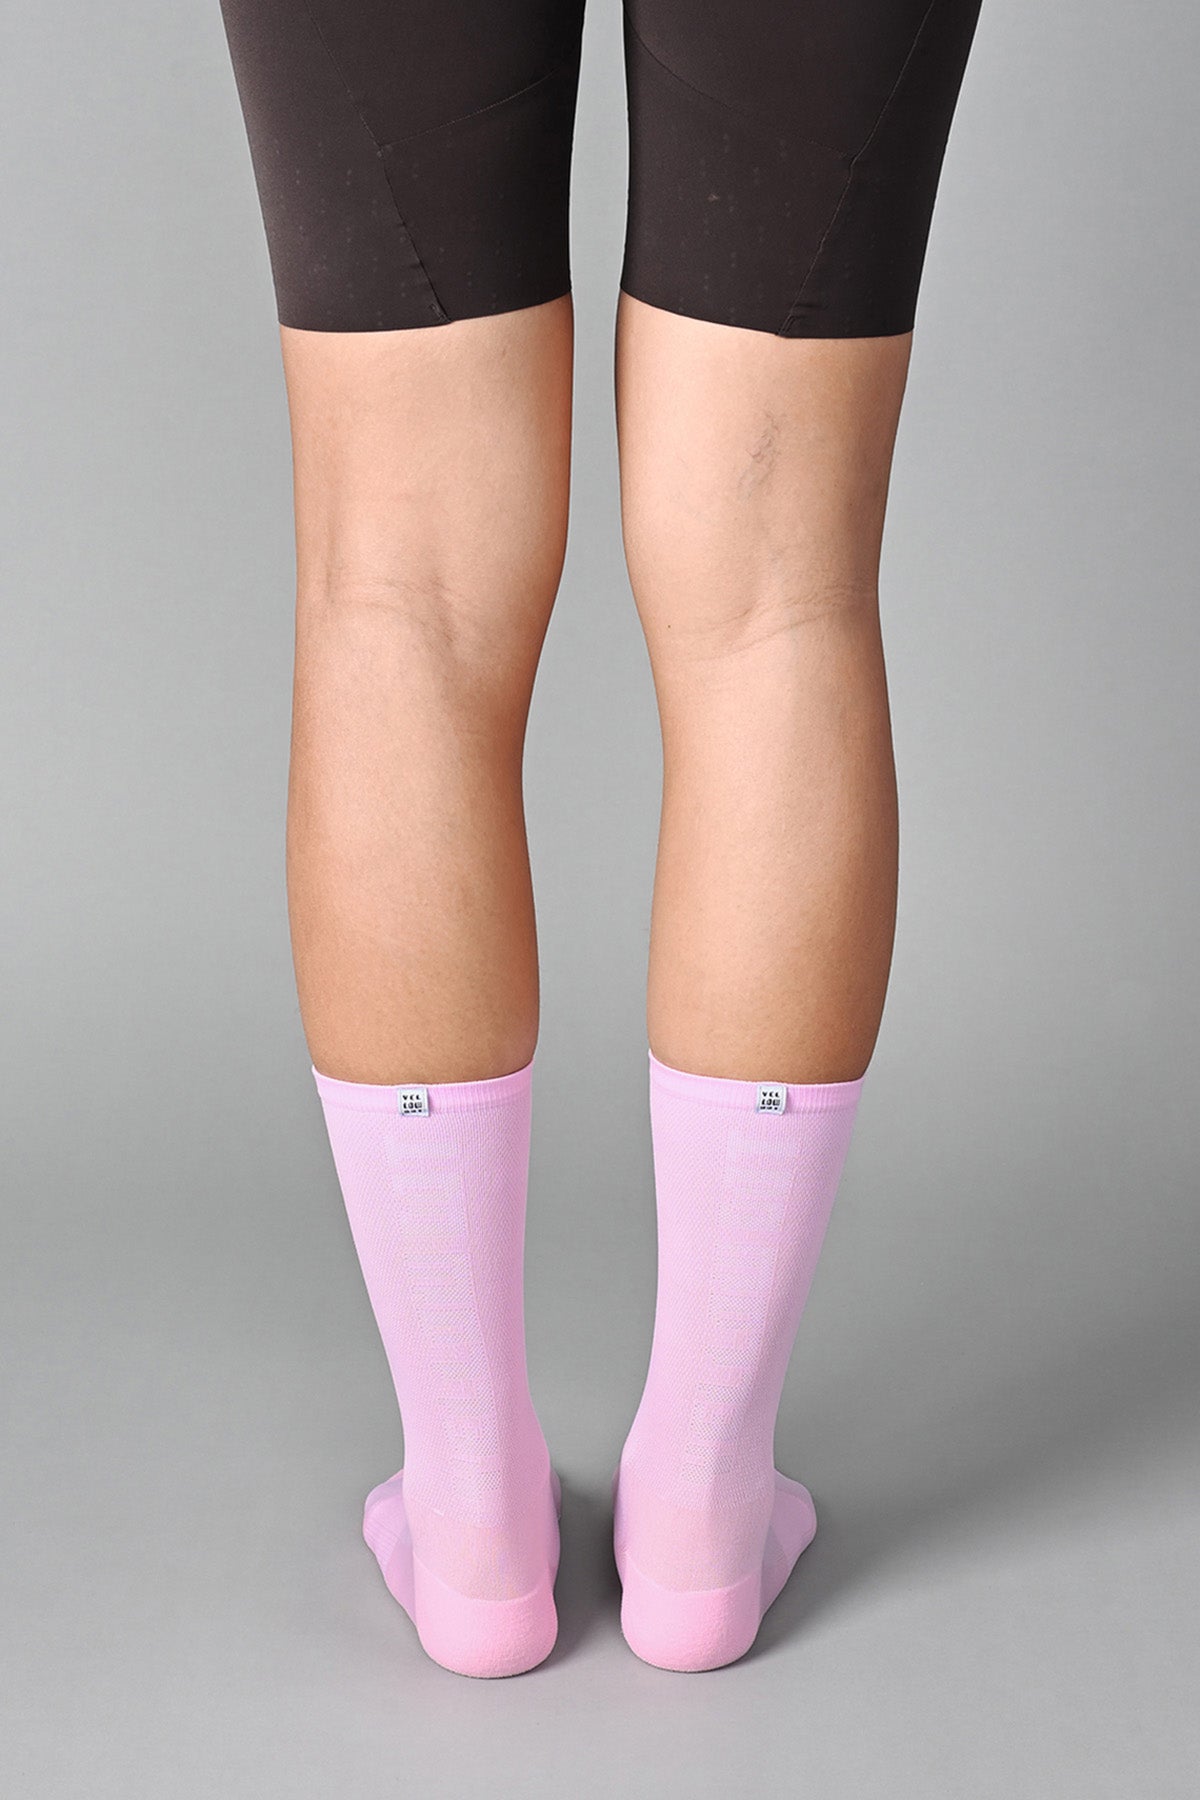 STEALTH - CAMEO PINK REAR | BEST CYCLING SOCKS